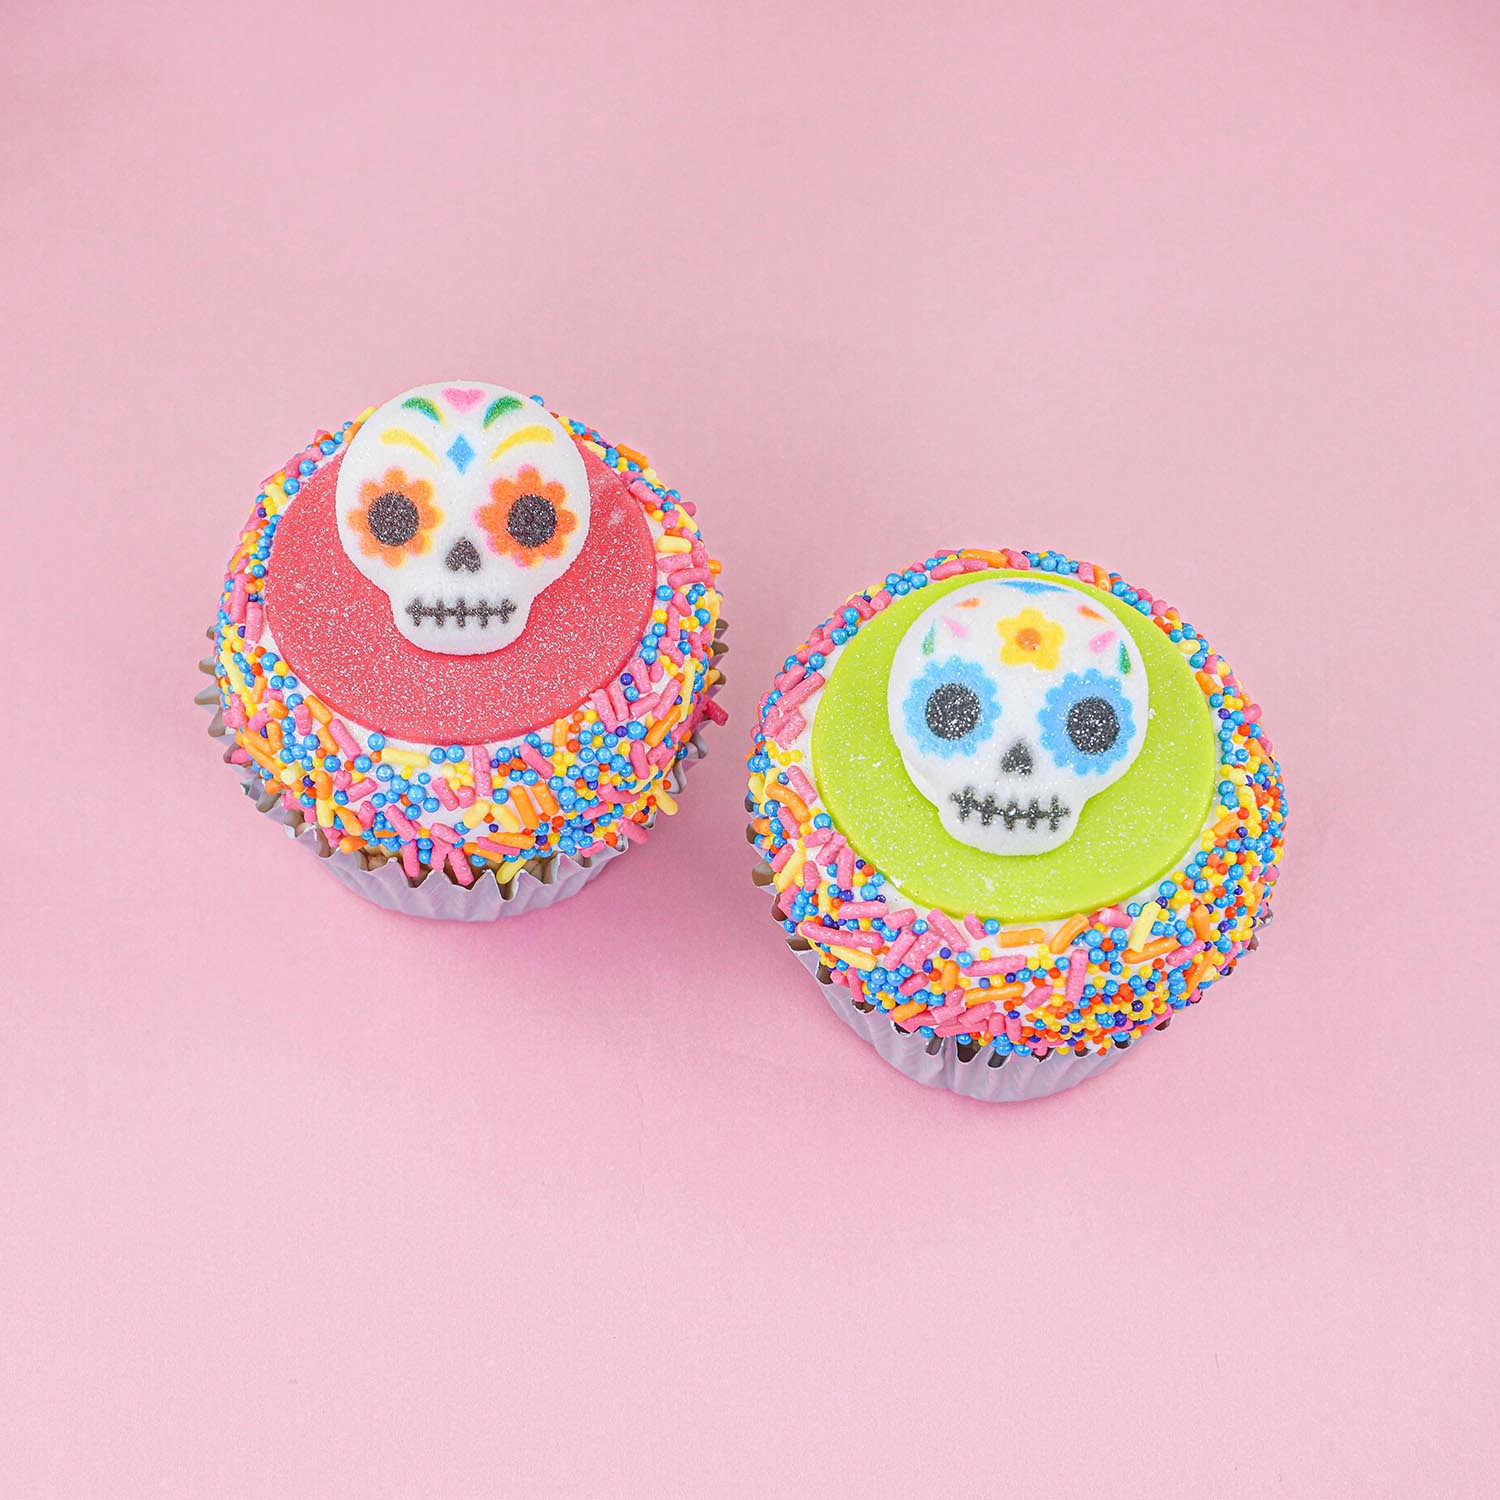 Day of the Dead pinkl fondant and sprinkle cupcake and a green fondant sprinkle cupcake with skull sugar layons